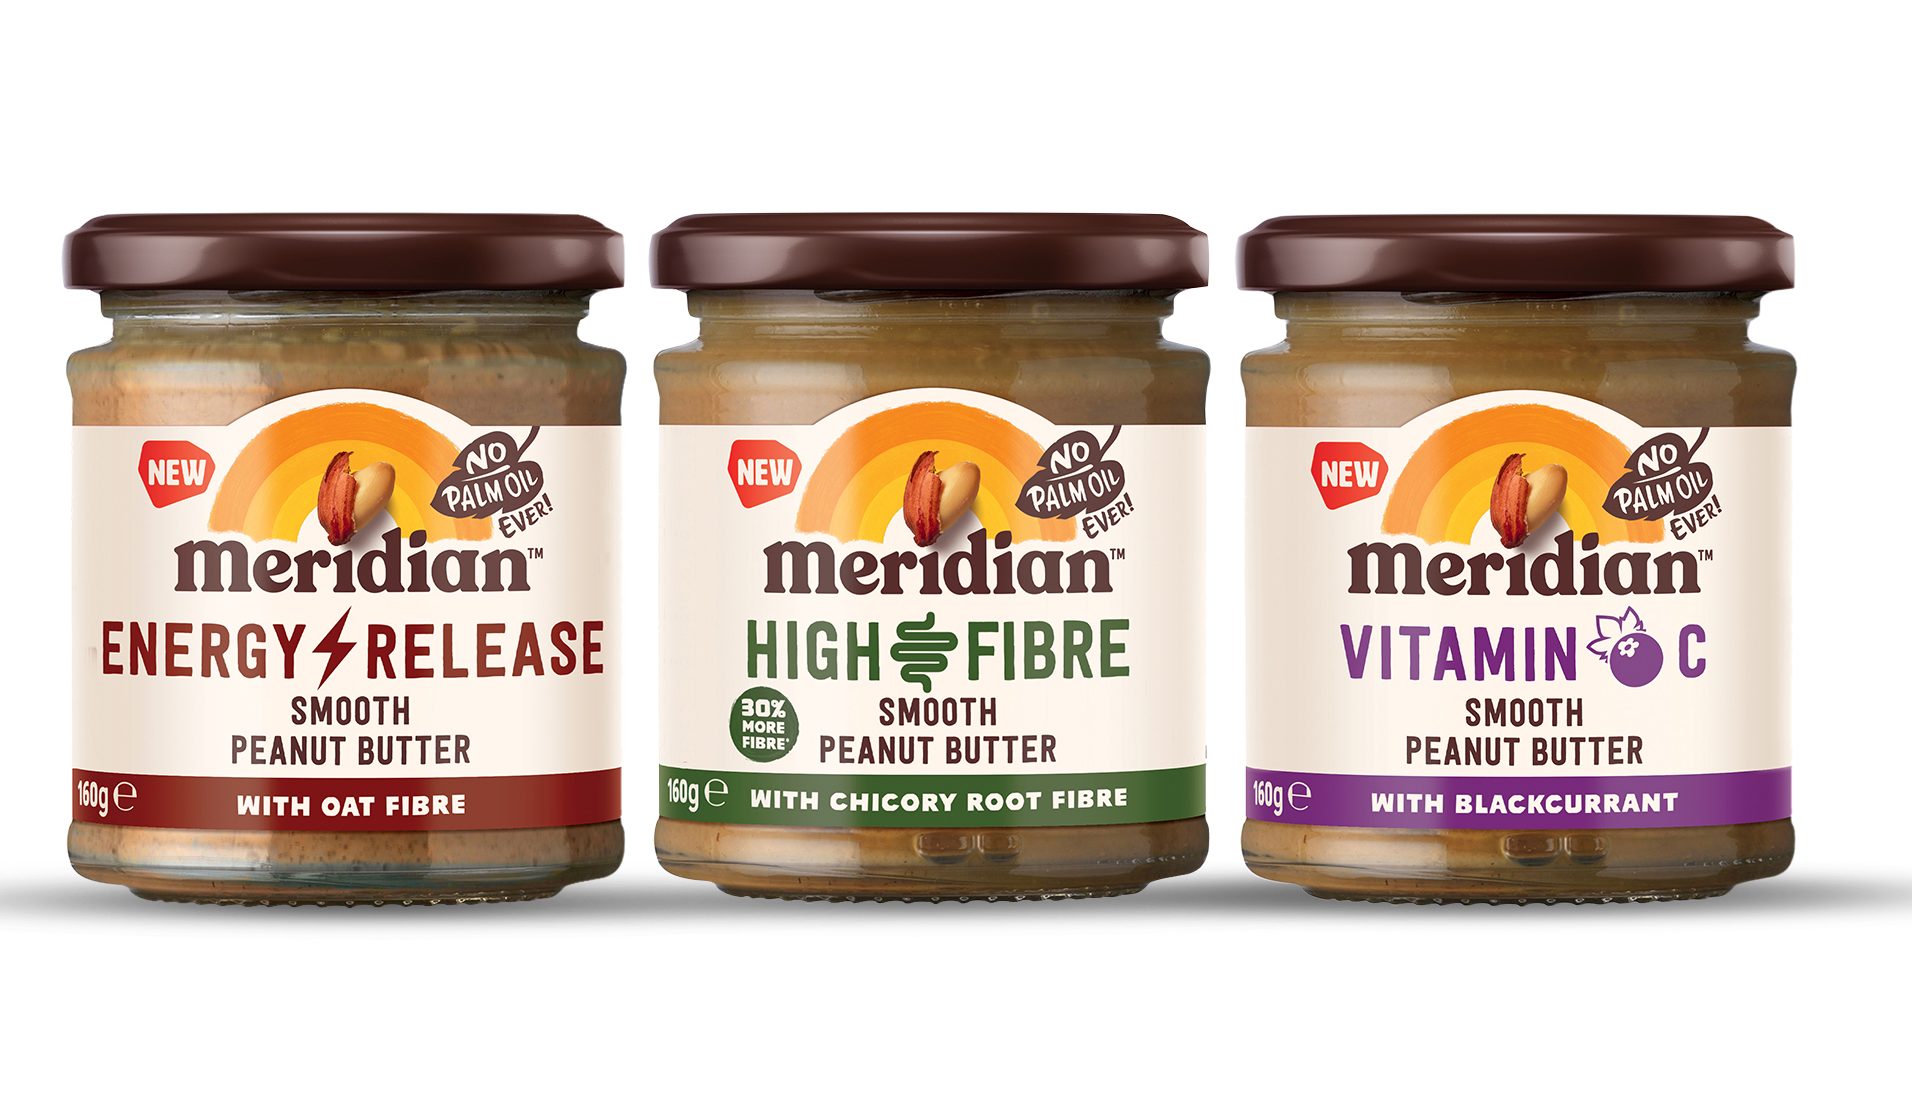 Meridian energy release, high fibre, and vitamin C peanut butters